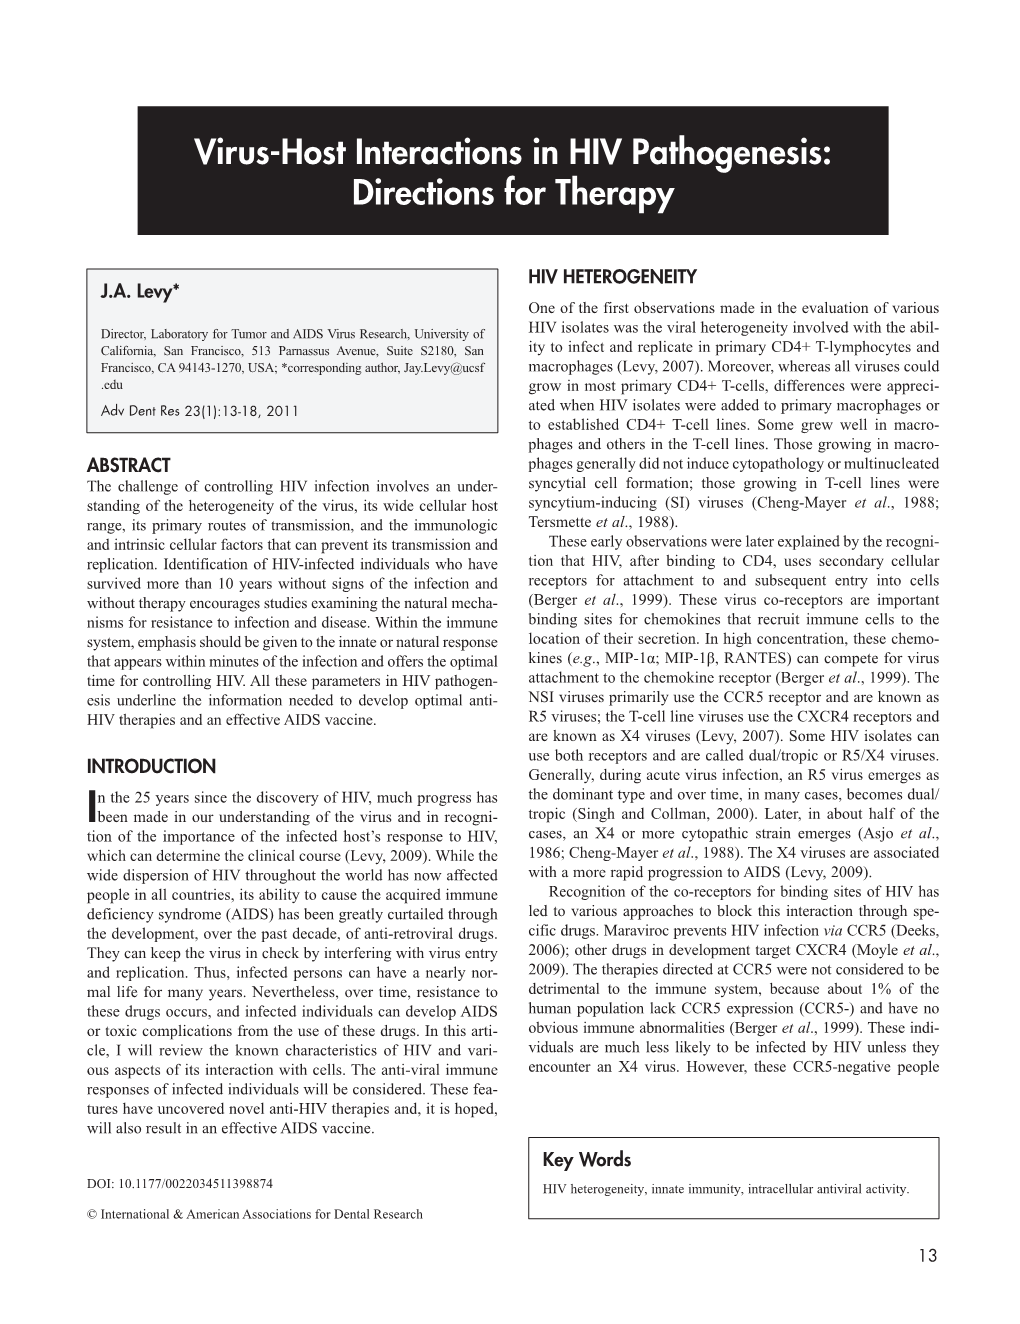 Virus-Host Interactions in HIV Pathogenesis: Directions for Therapy